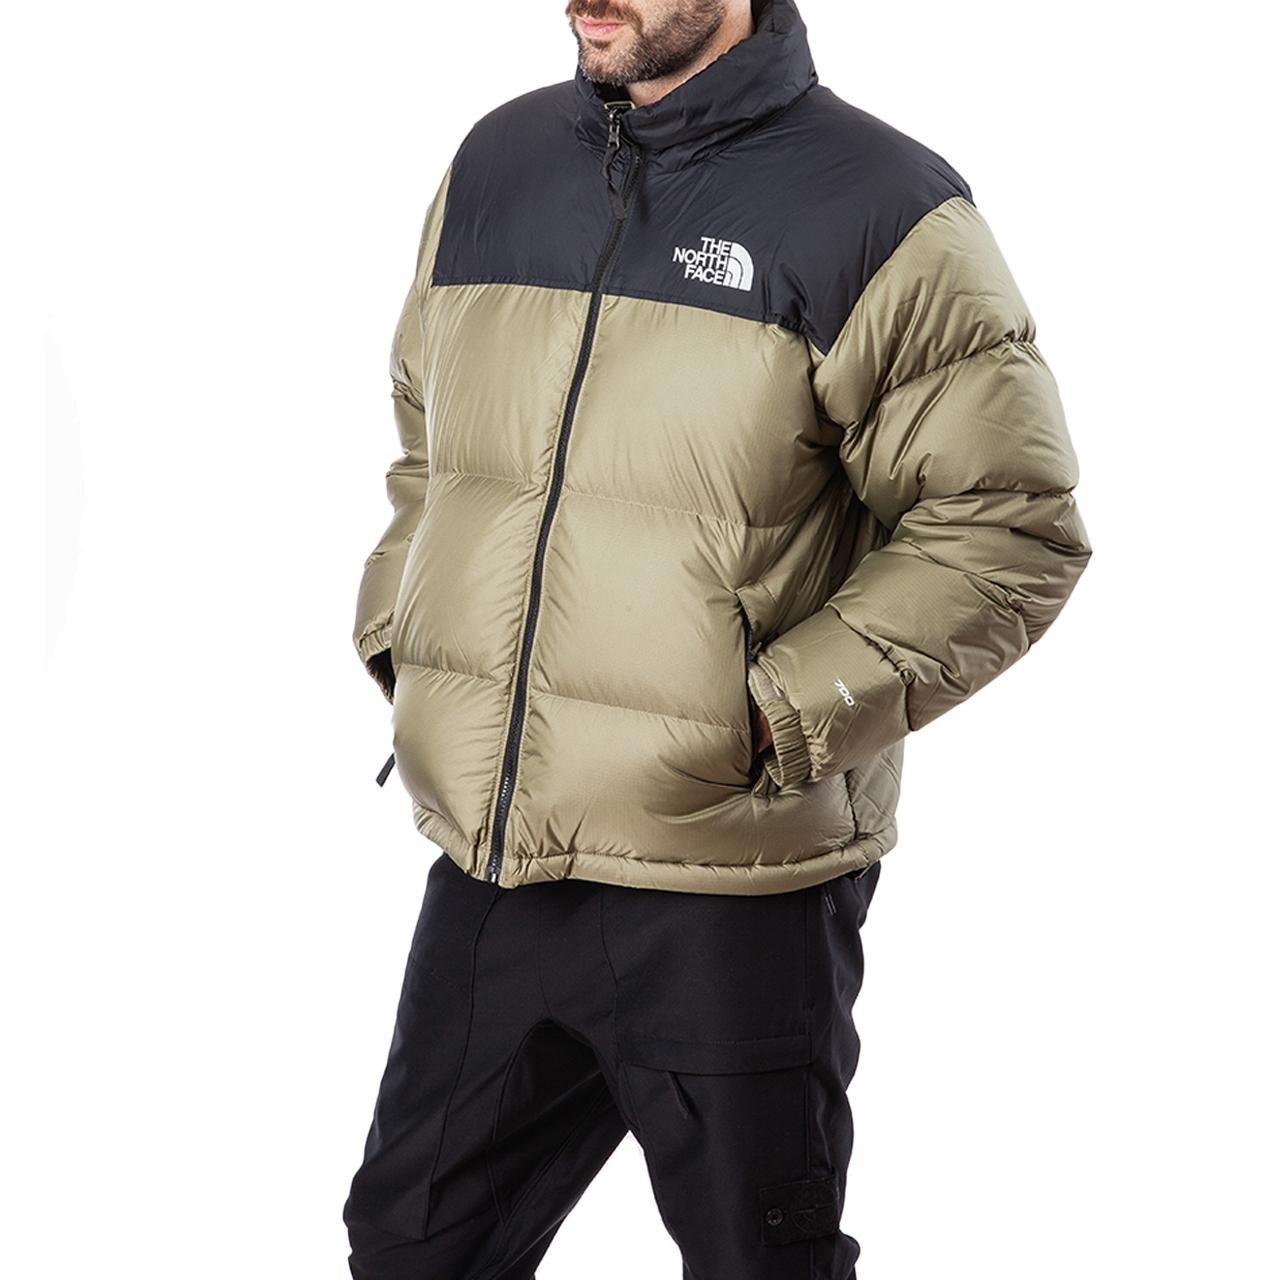 The North Face Goose M 1996 Rtro Nuptse Jacket in Green for Men - Lyst